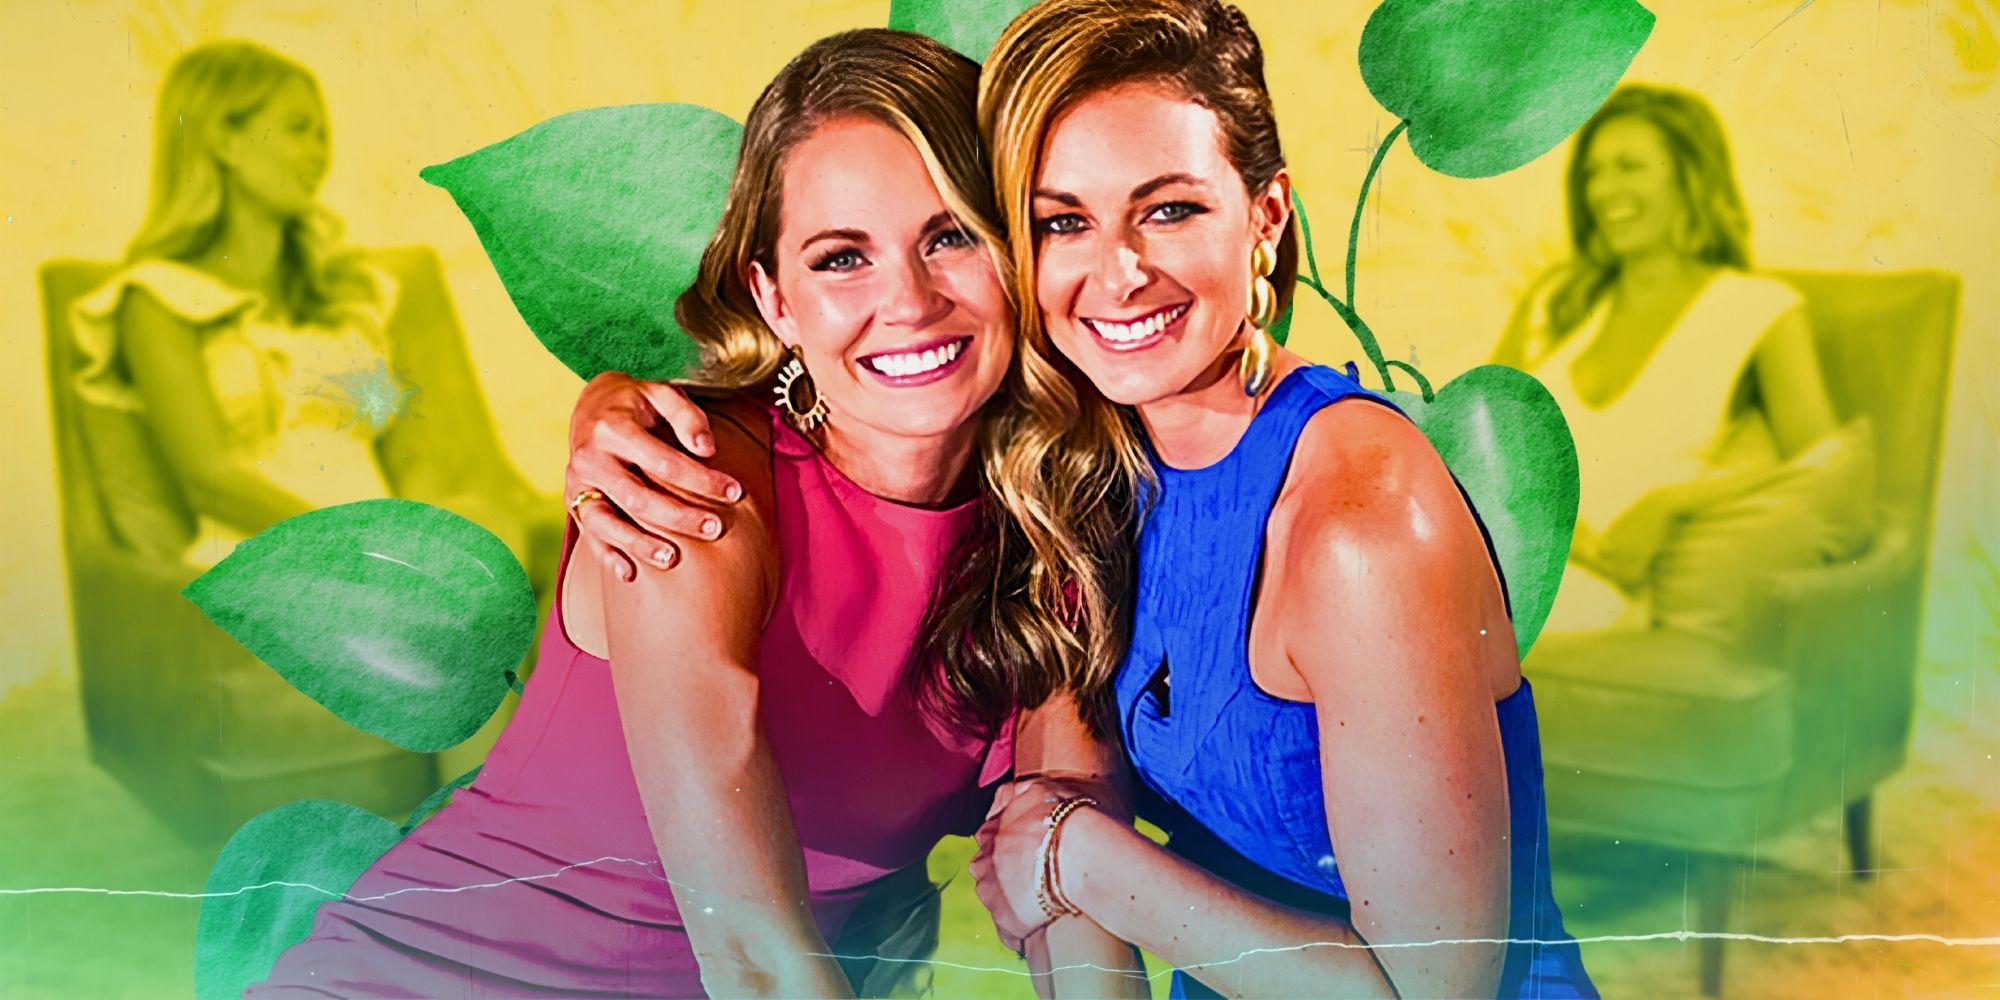 Cameran Eubanks & Chelsea Meissner from Southern Charm